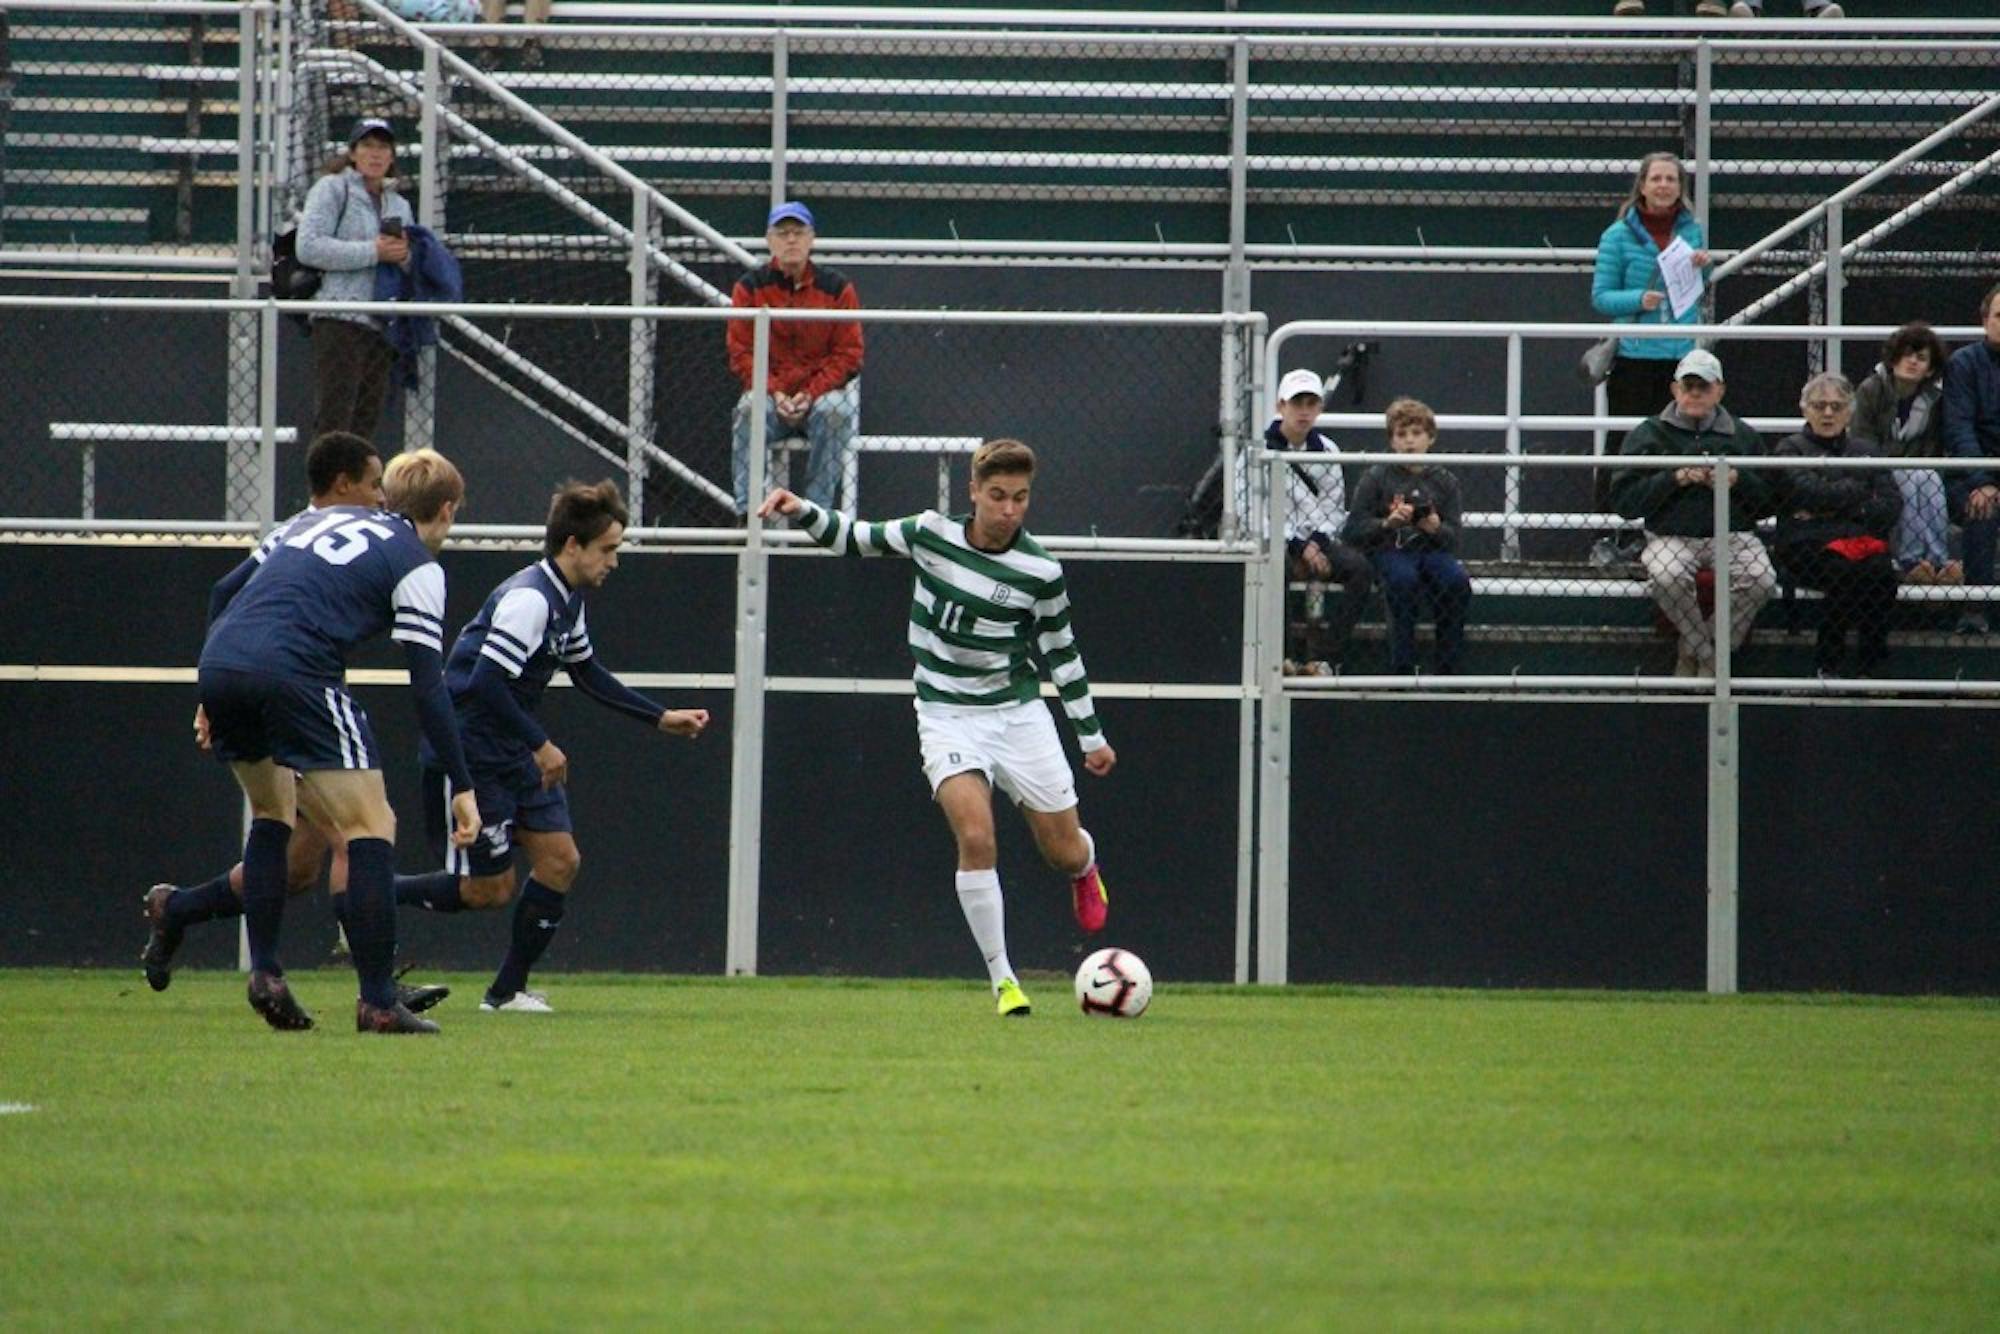 Dawson McCartney ’21, one of the Big Green’s leading offensive weapons, winds up to kick the ball against Yale University.